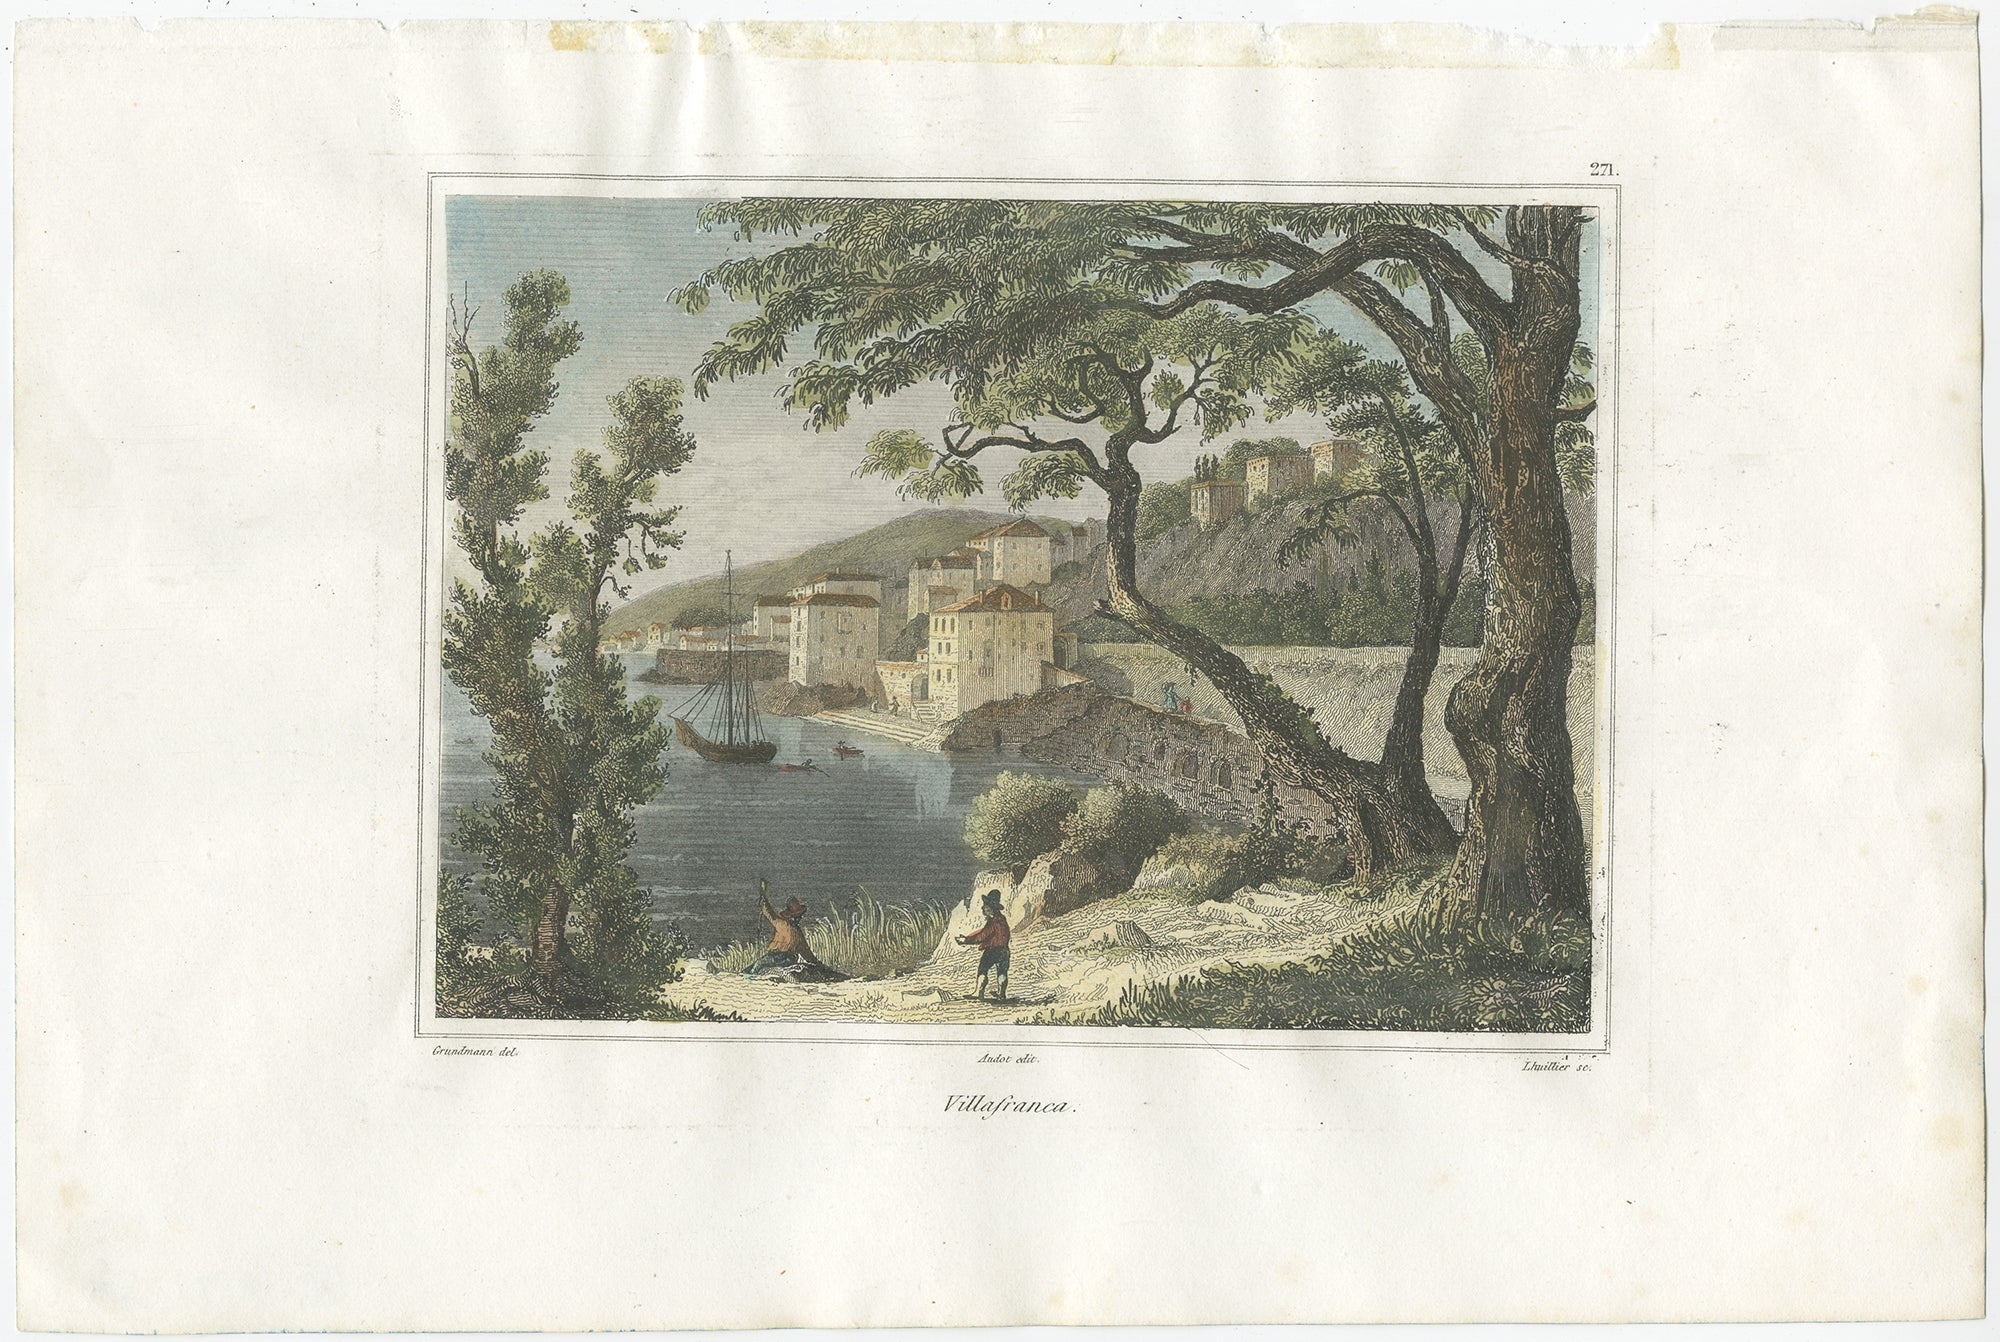 Antique Print of the City of Villefranche in France, circa 1840